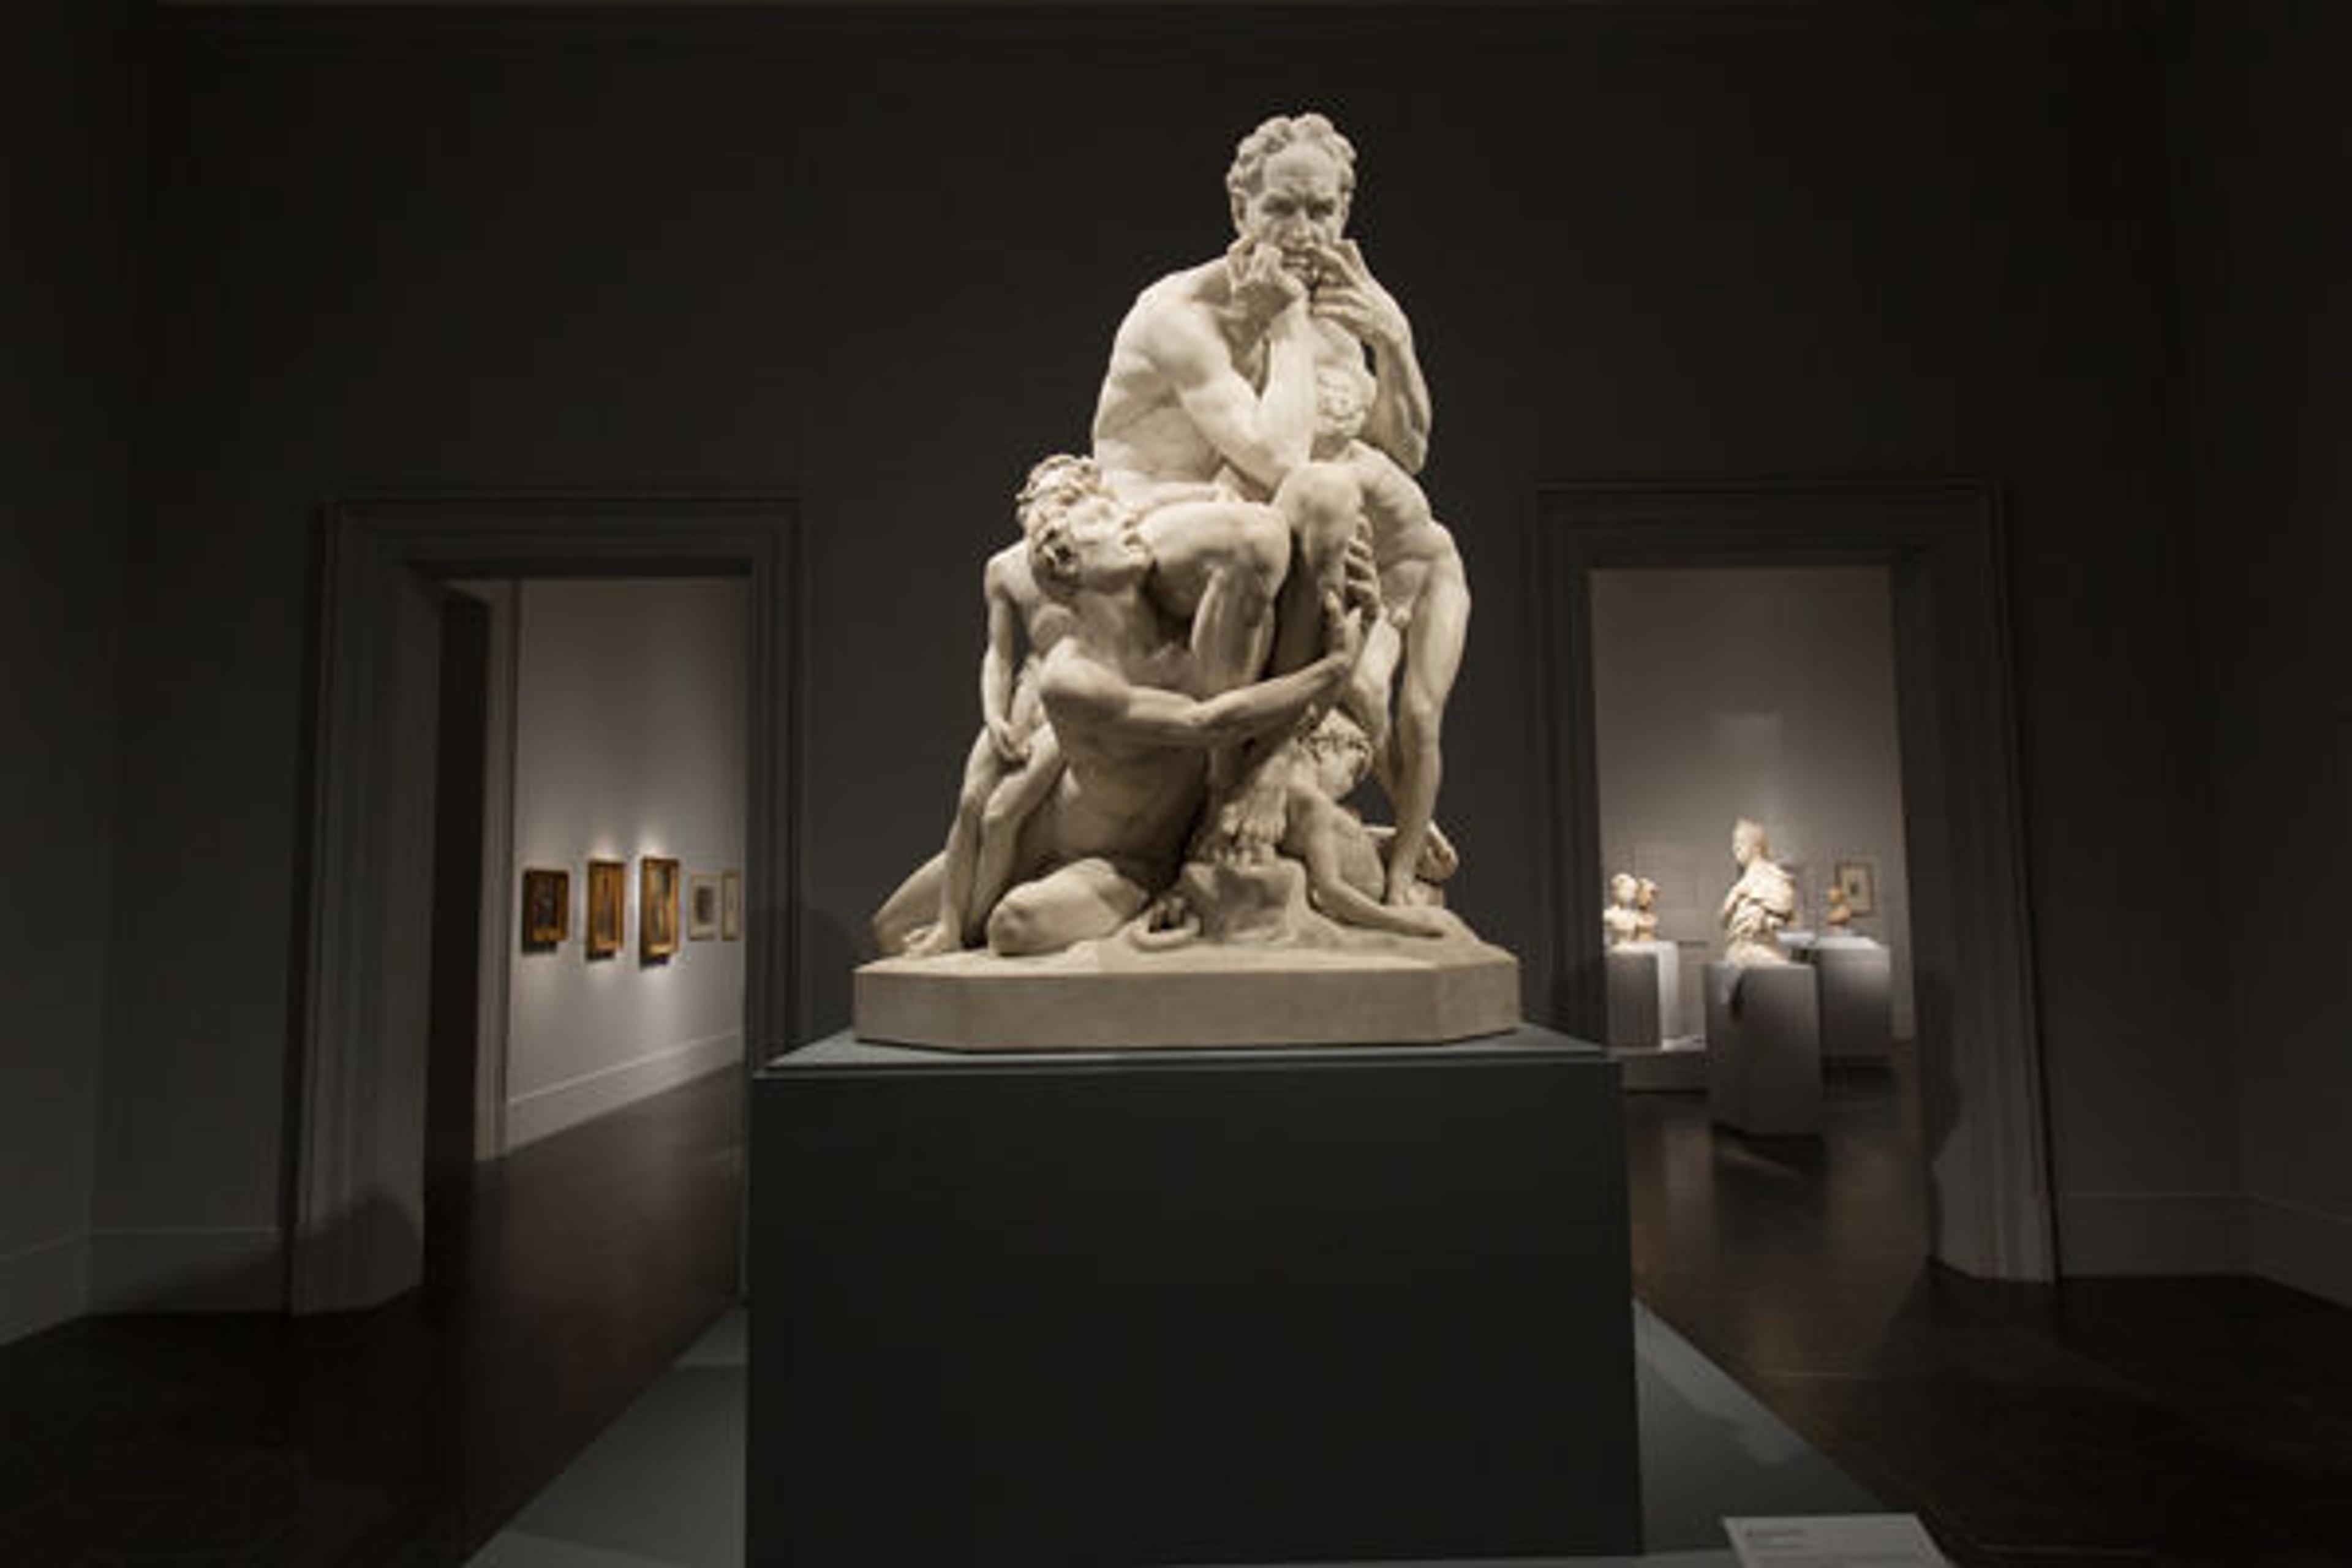 Gallery view of Carpeaux exhibition